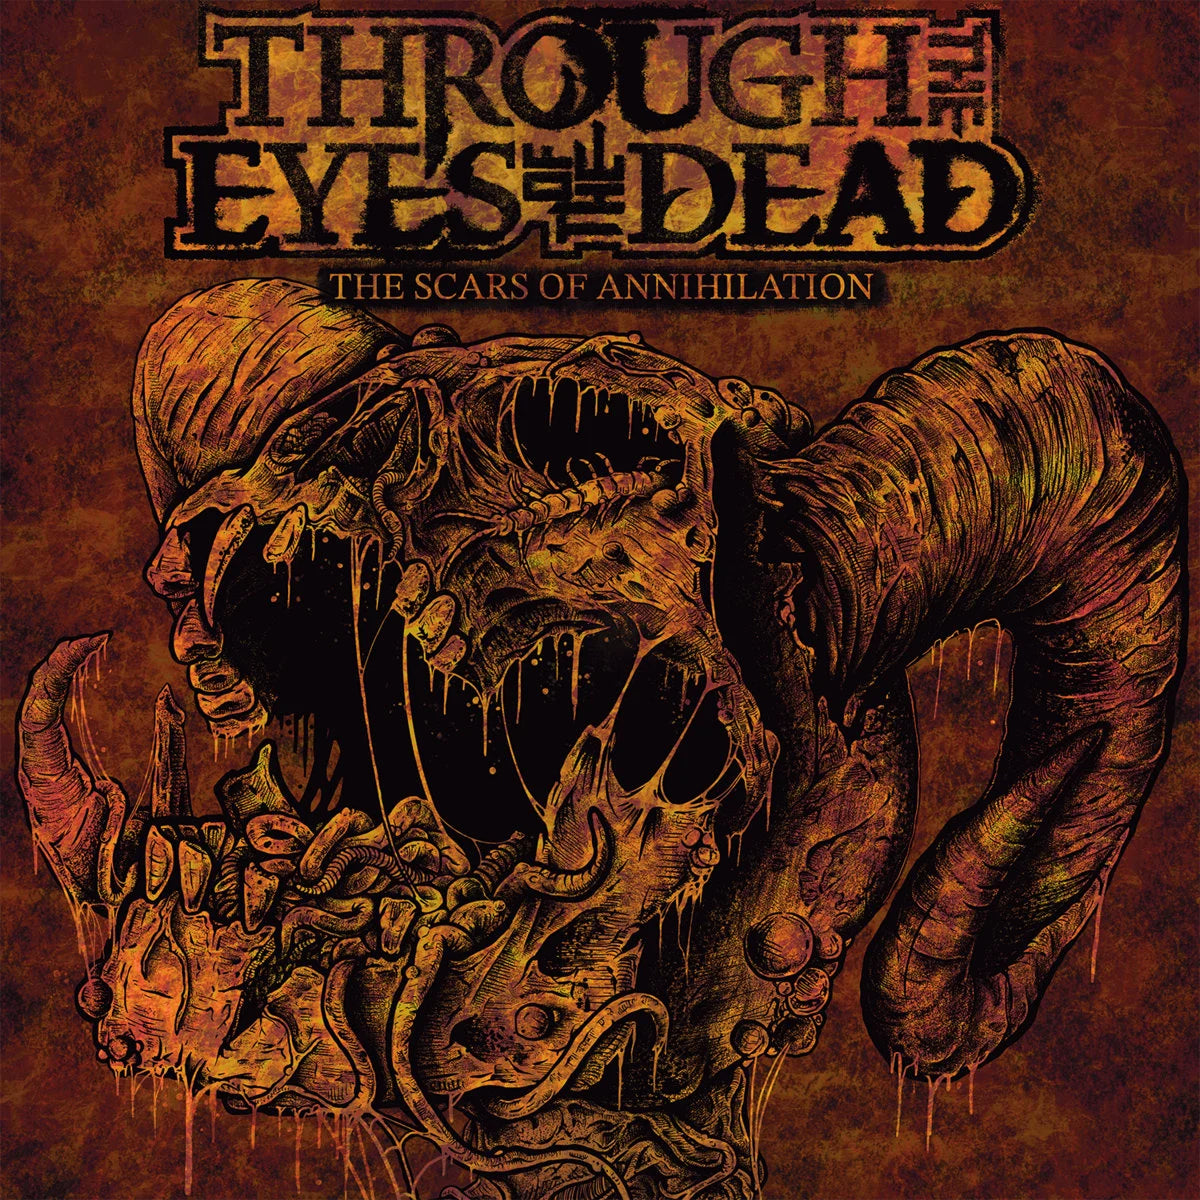 Through the Eyes of the Dead "The Scars of Annihilation" Skepsis Blue Vinyl